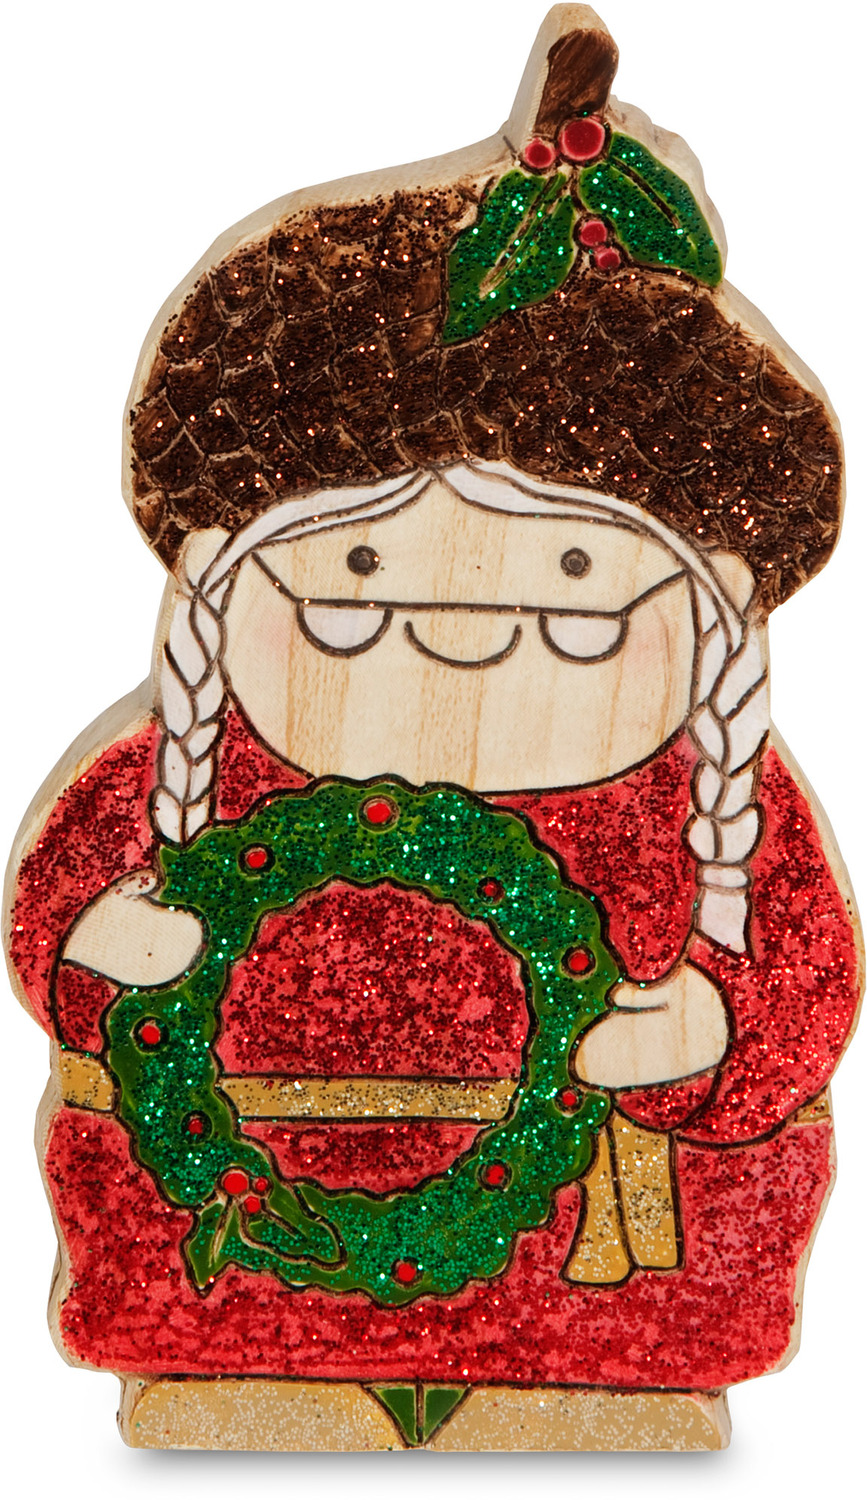 Happy Holidays by Heavenly Winter Woods - Happy Holidays - 4.5" Mrs. Claus Gnome holding Wreath Figurine